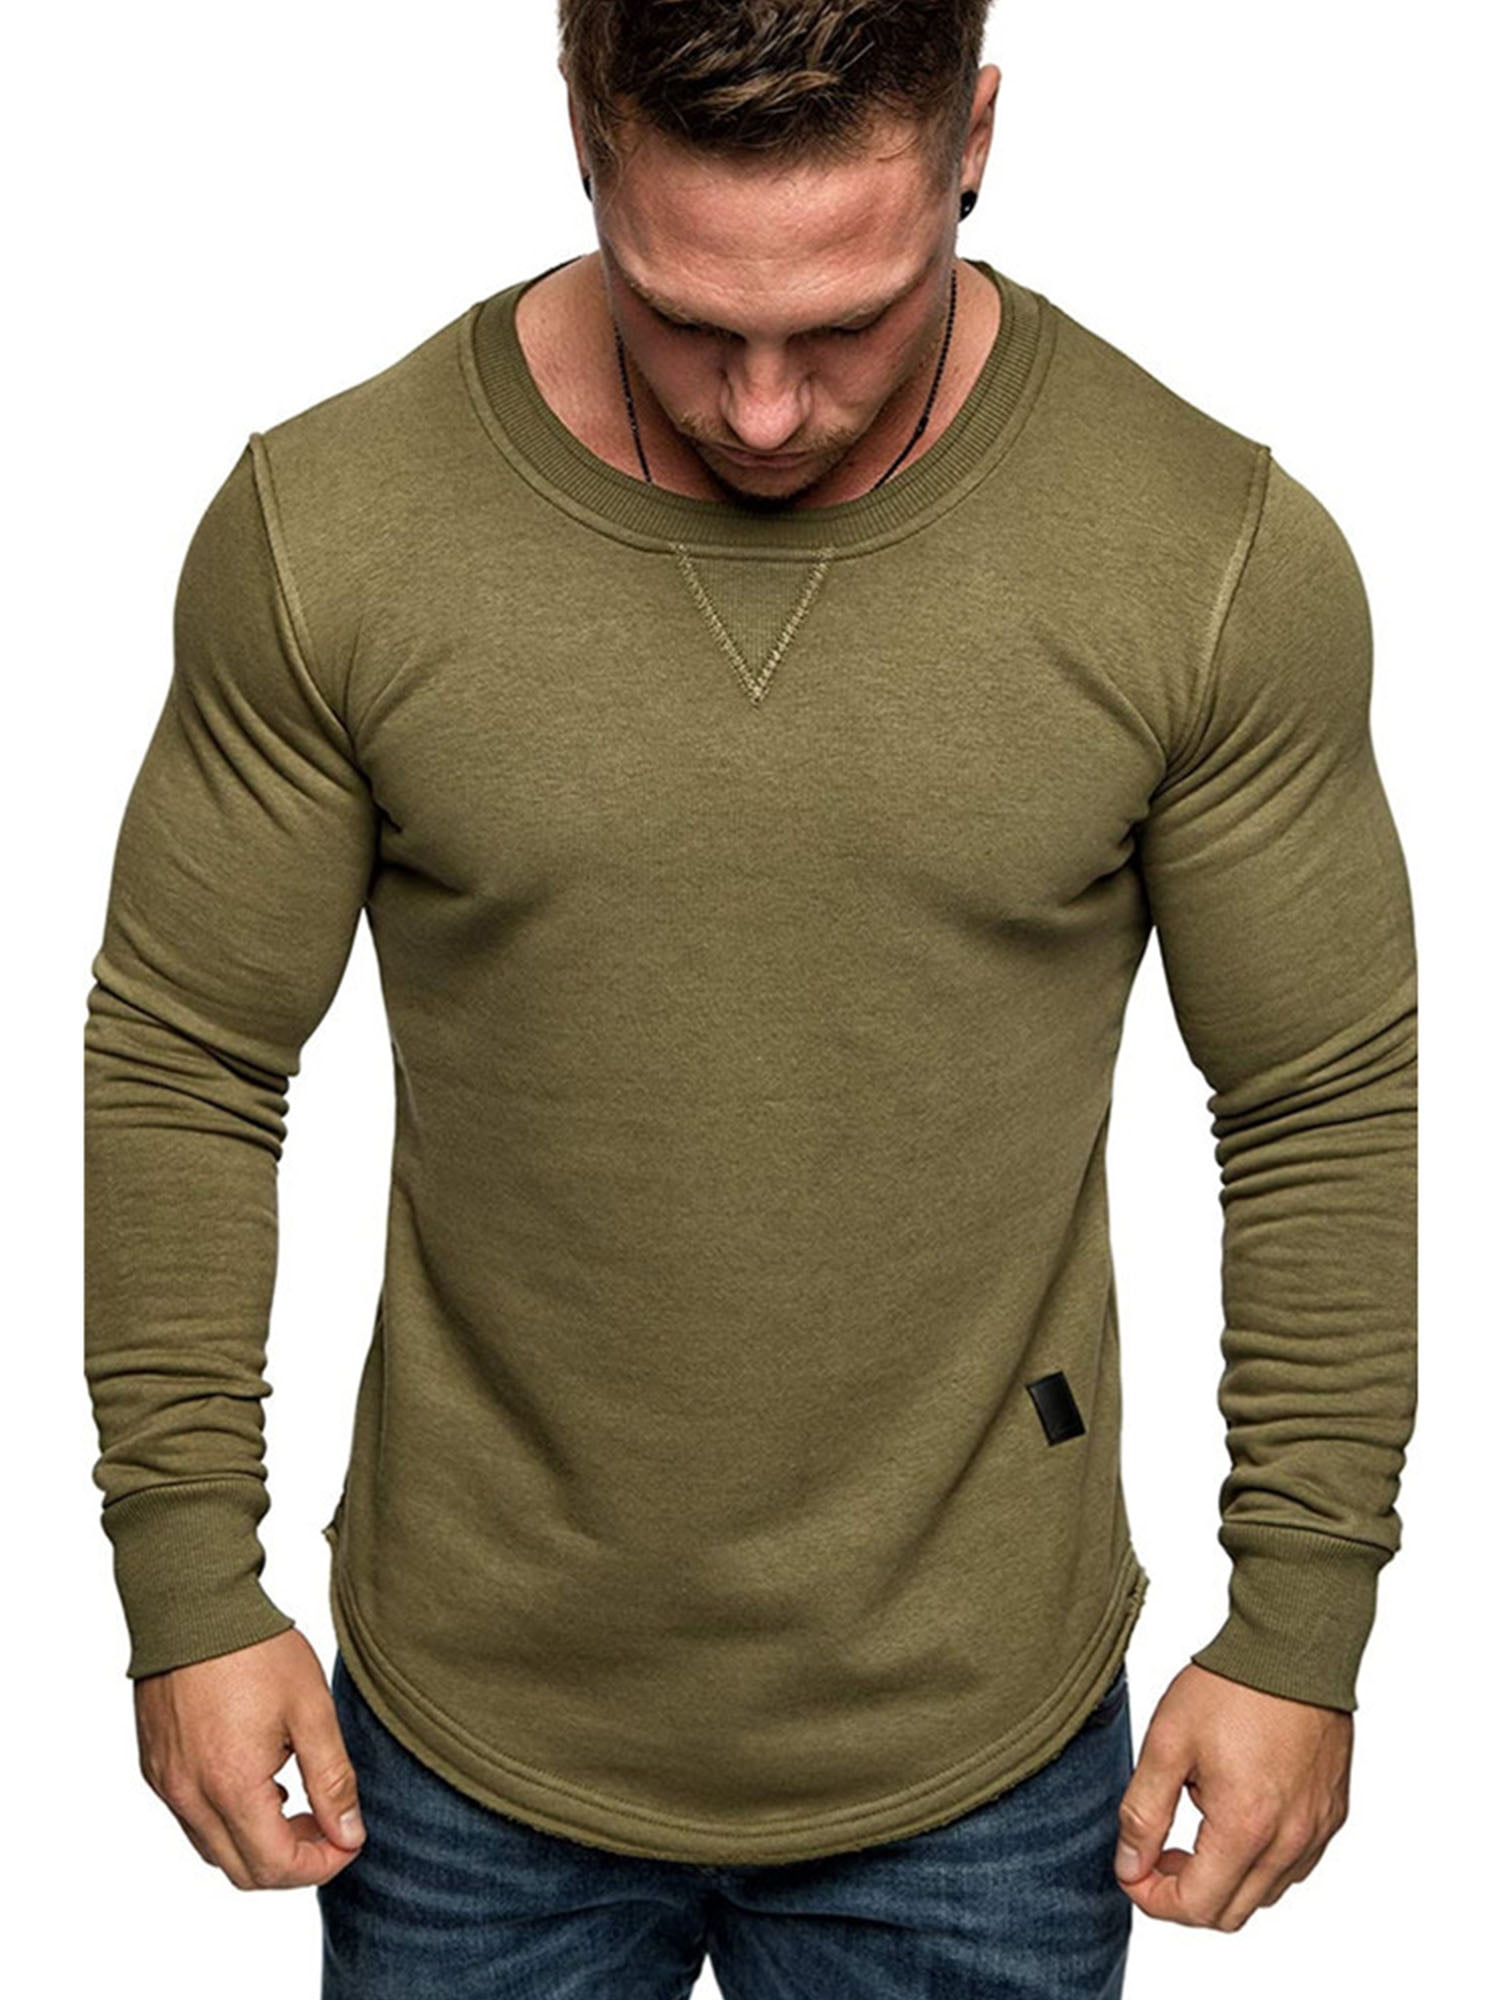 Fashion Men's Slim Fit  Round Neck Long Sleeve Muscle Tee T-shirt Casual Tops 